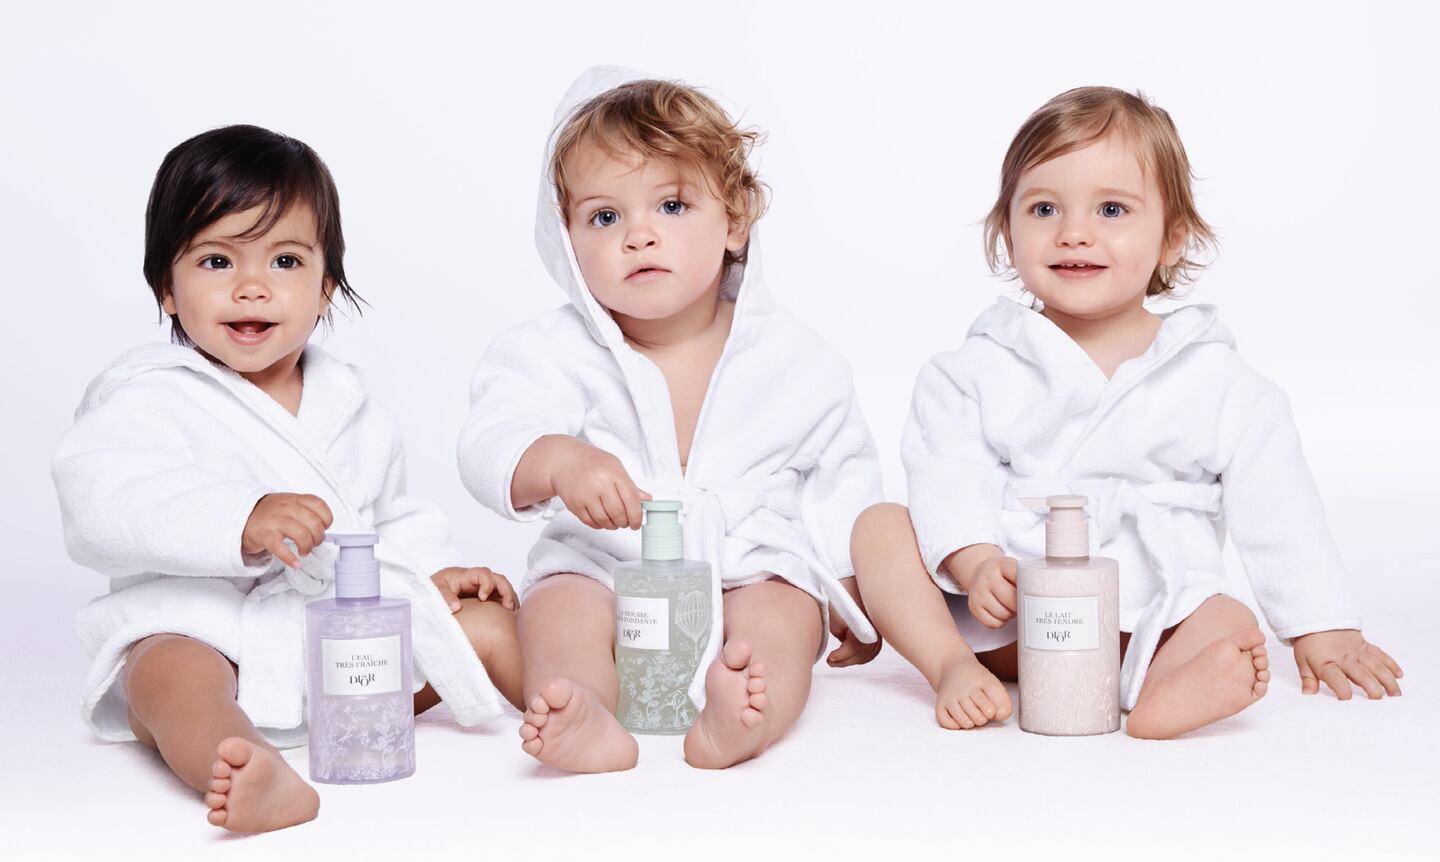 Babies in terrycloth robes with Dior skincare products.